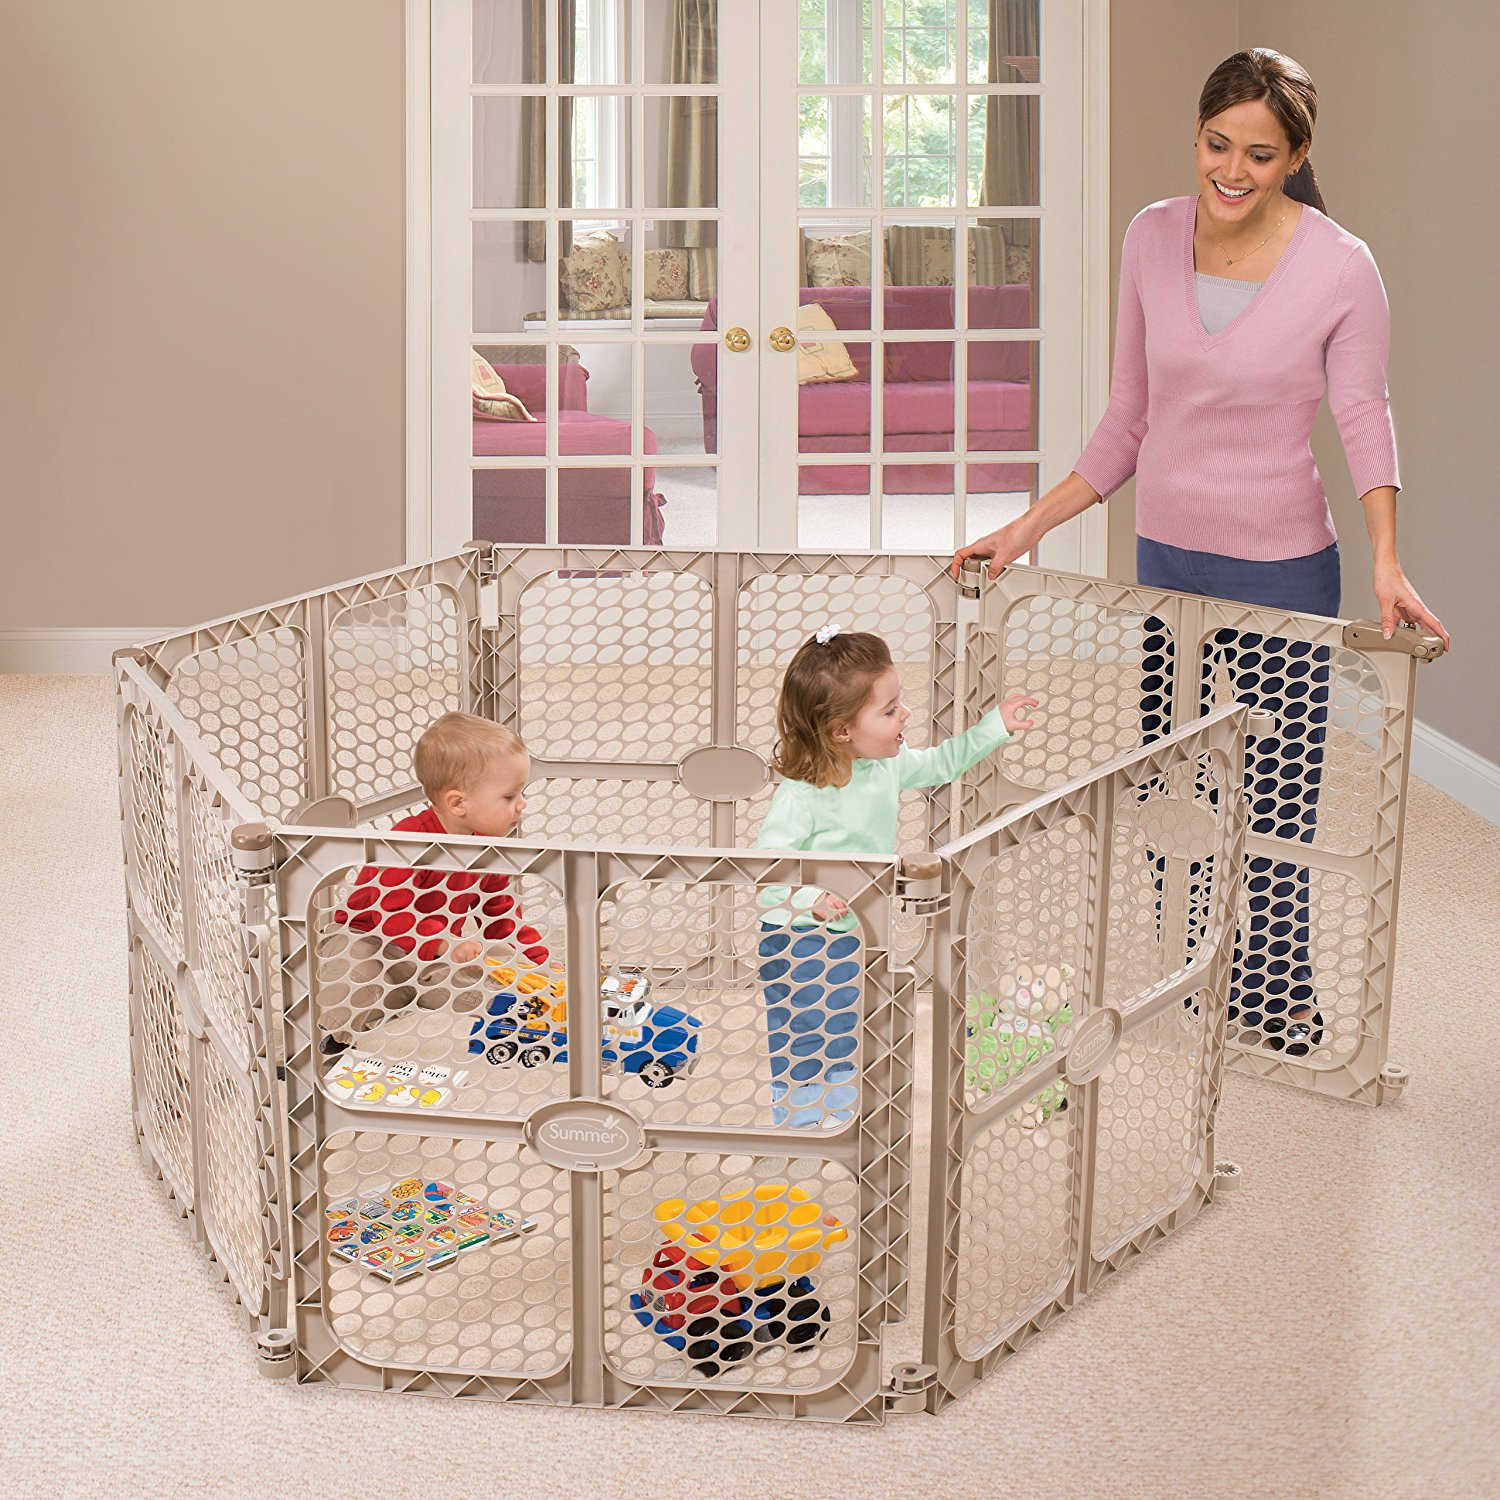 Summer Infant Secure Surround 6-Panel PlaySafe Playard Only $41.46 For Prime Members!